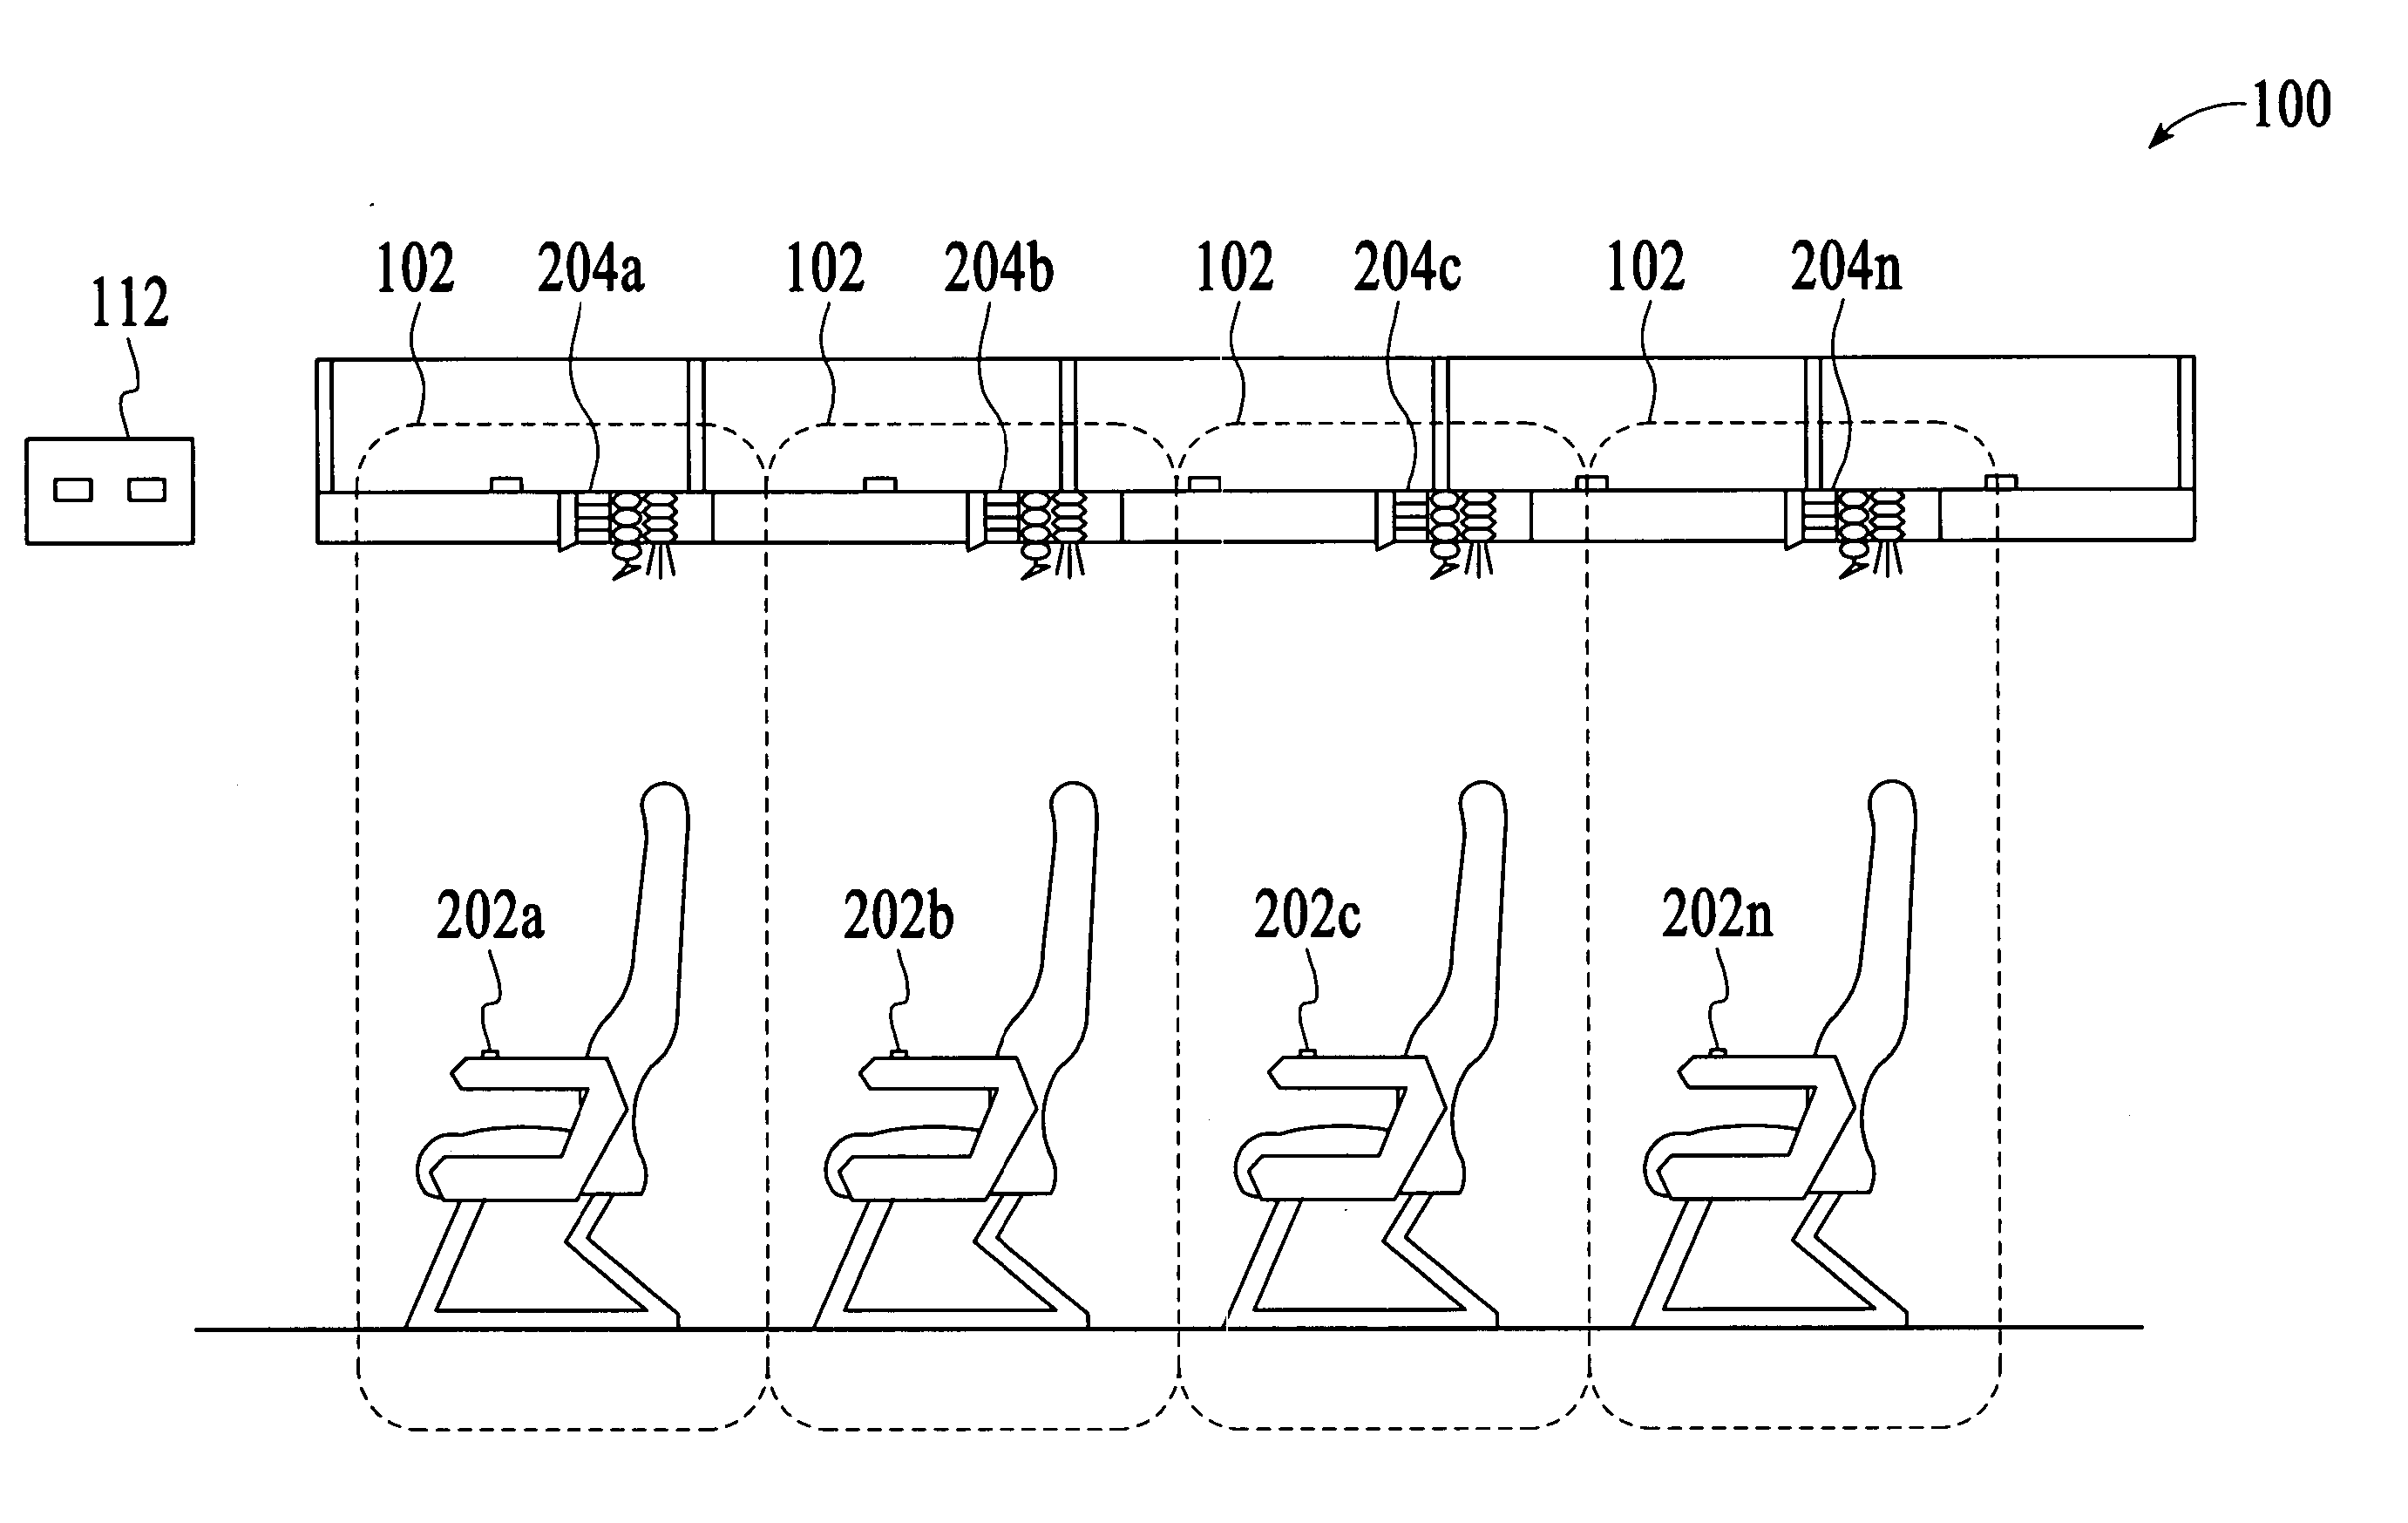 Simplified cabin services system for an aircraft